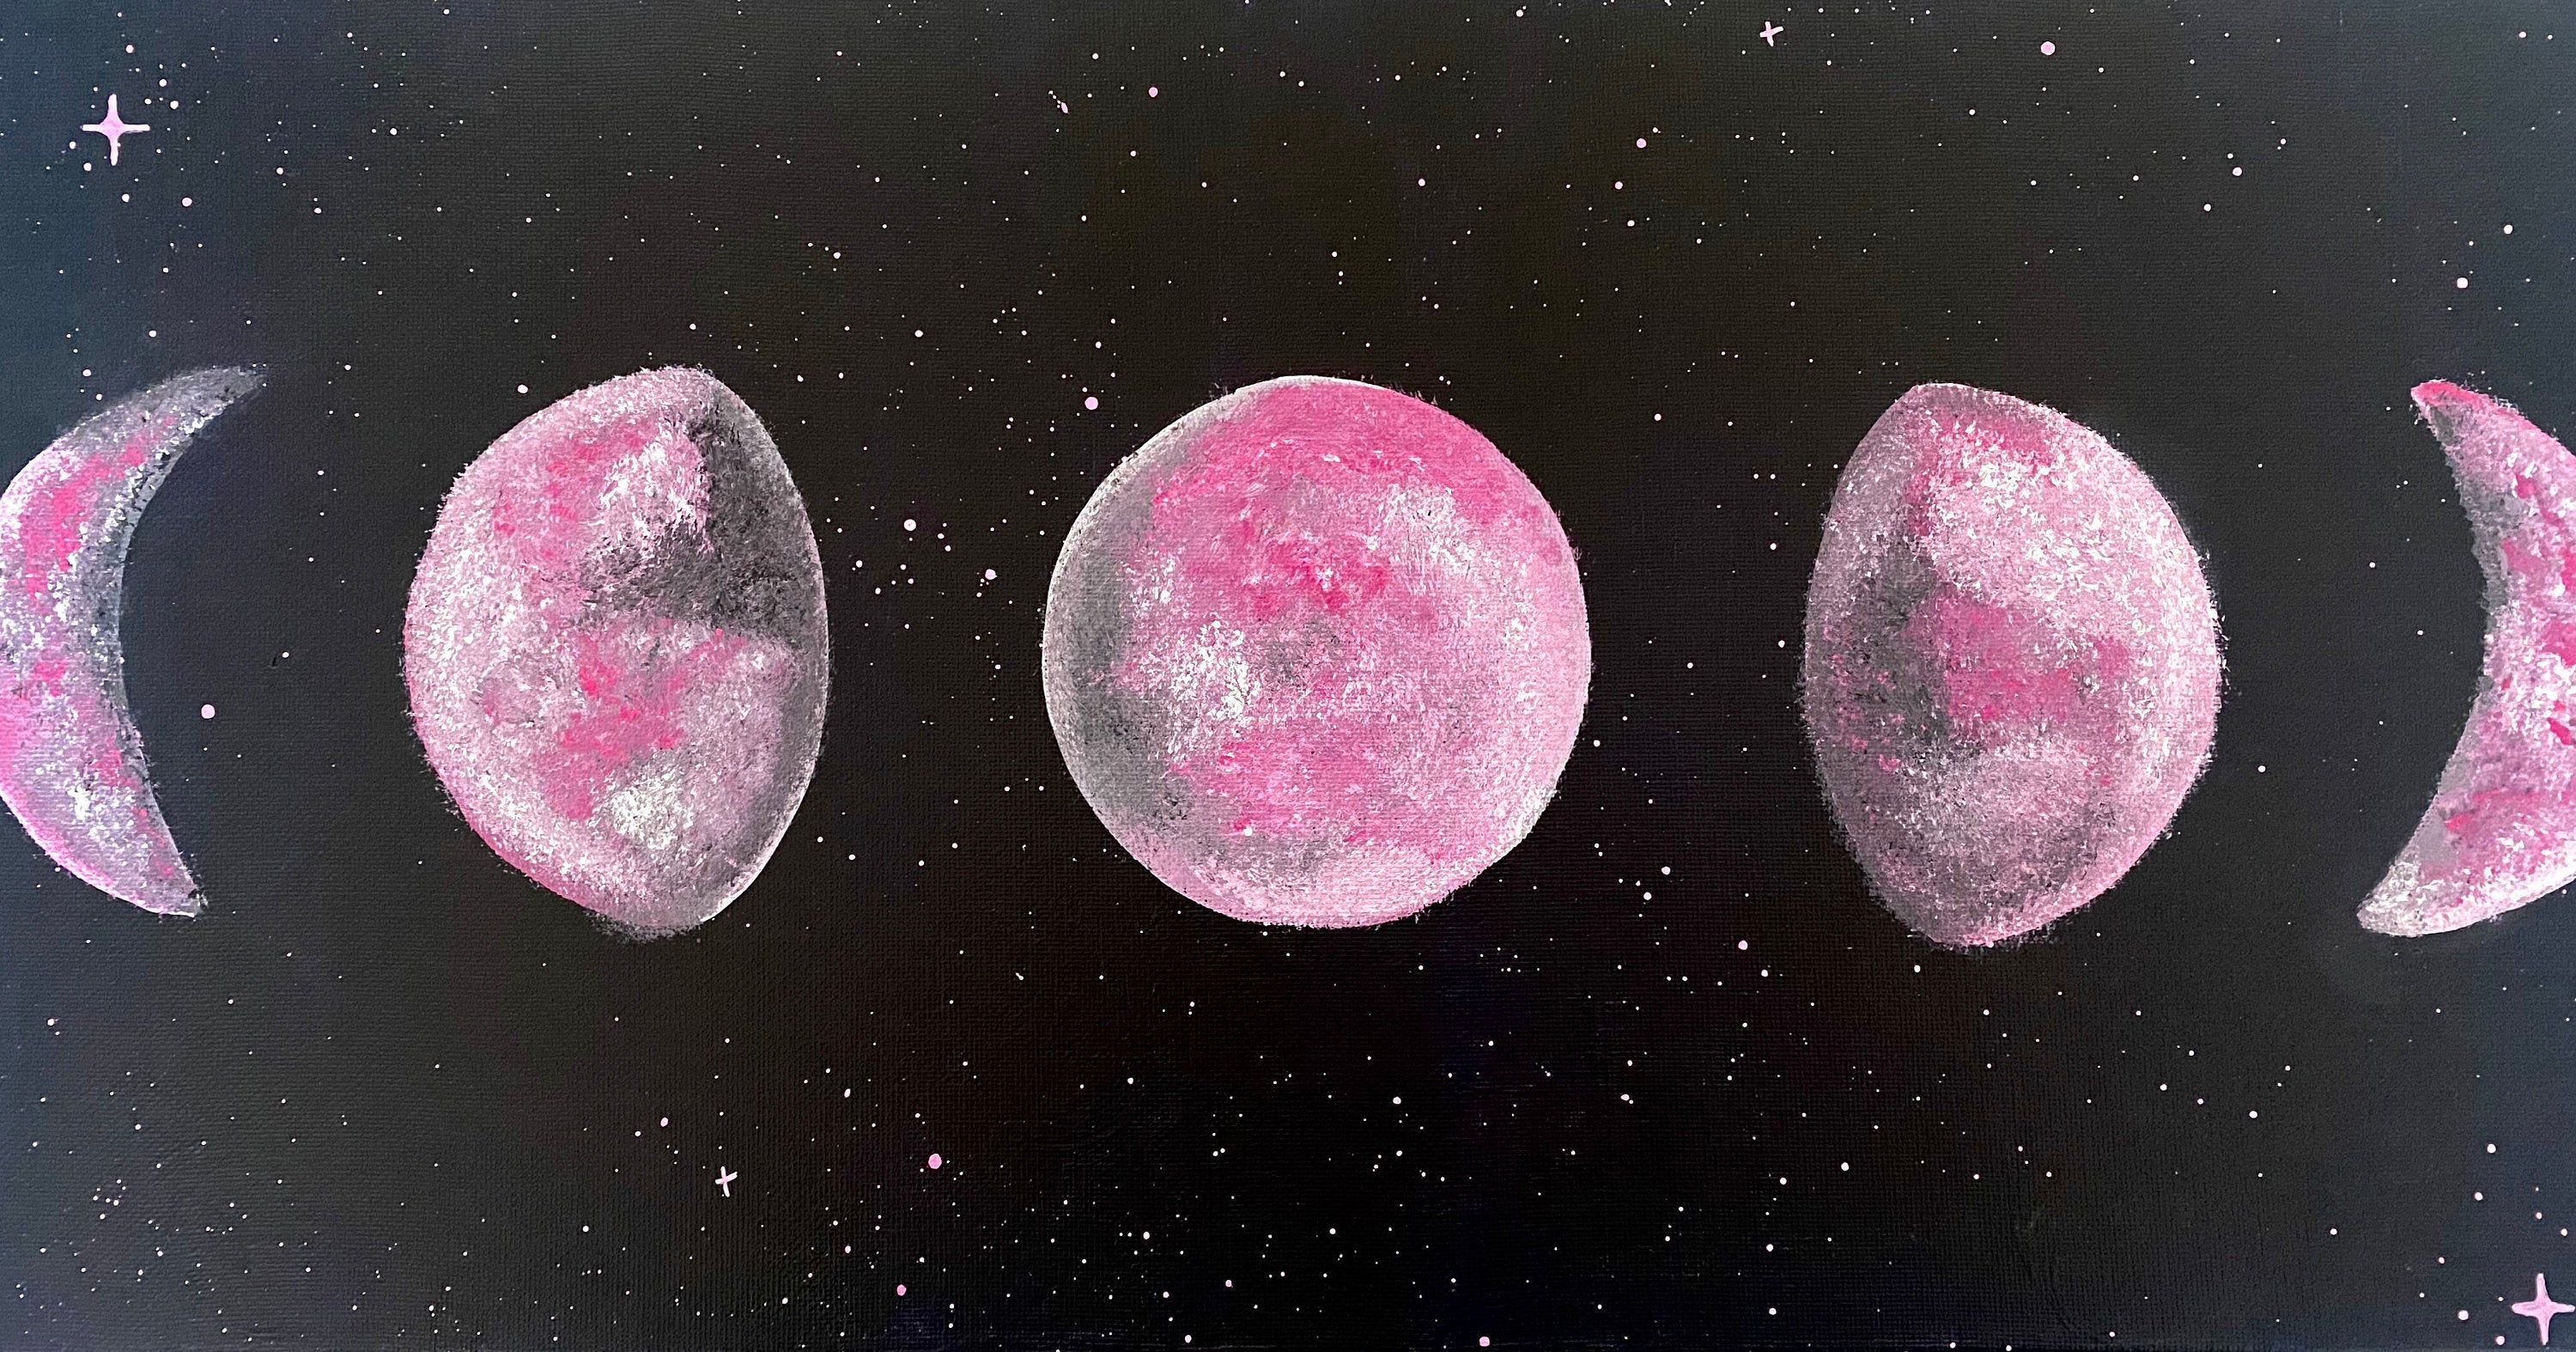 Original pink moon phases acrylic painting. Etsy. Pink moon, Moon phases art, Pink moon wallpaper